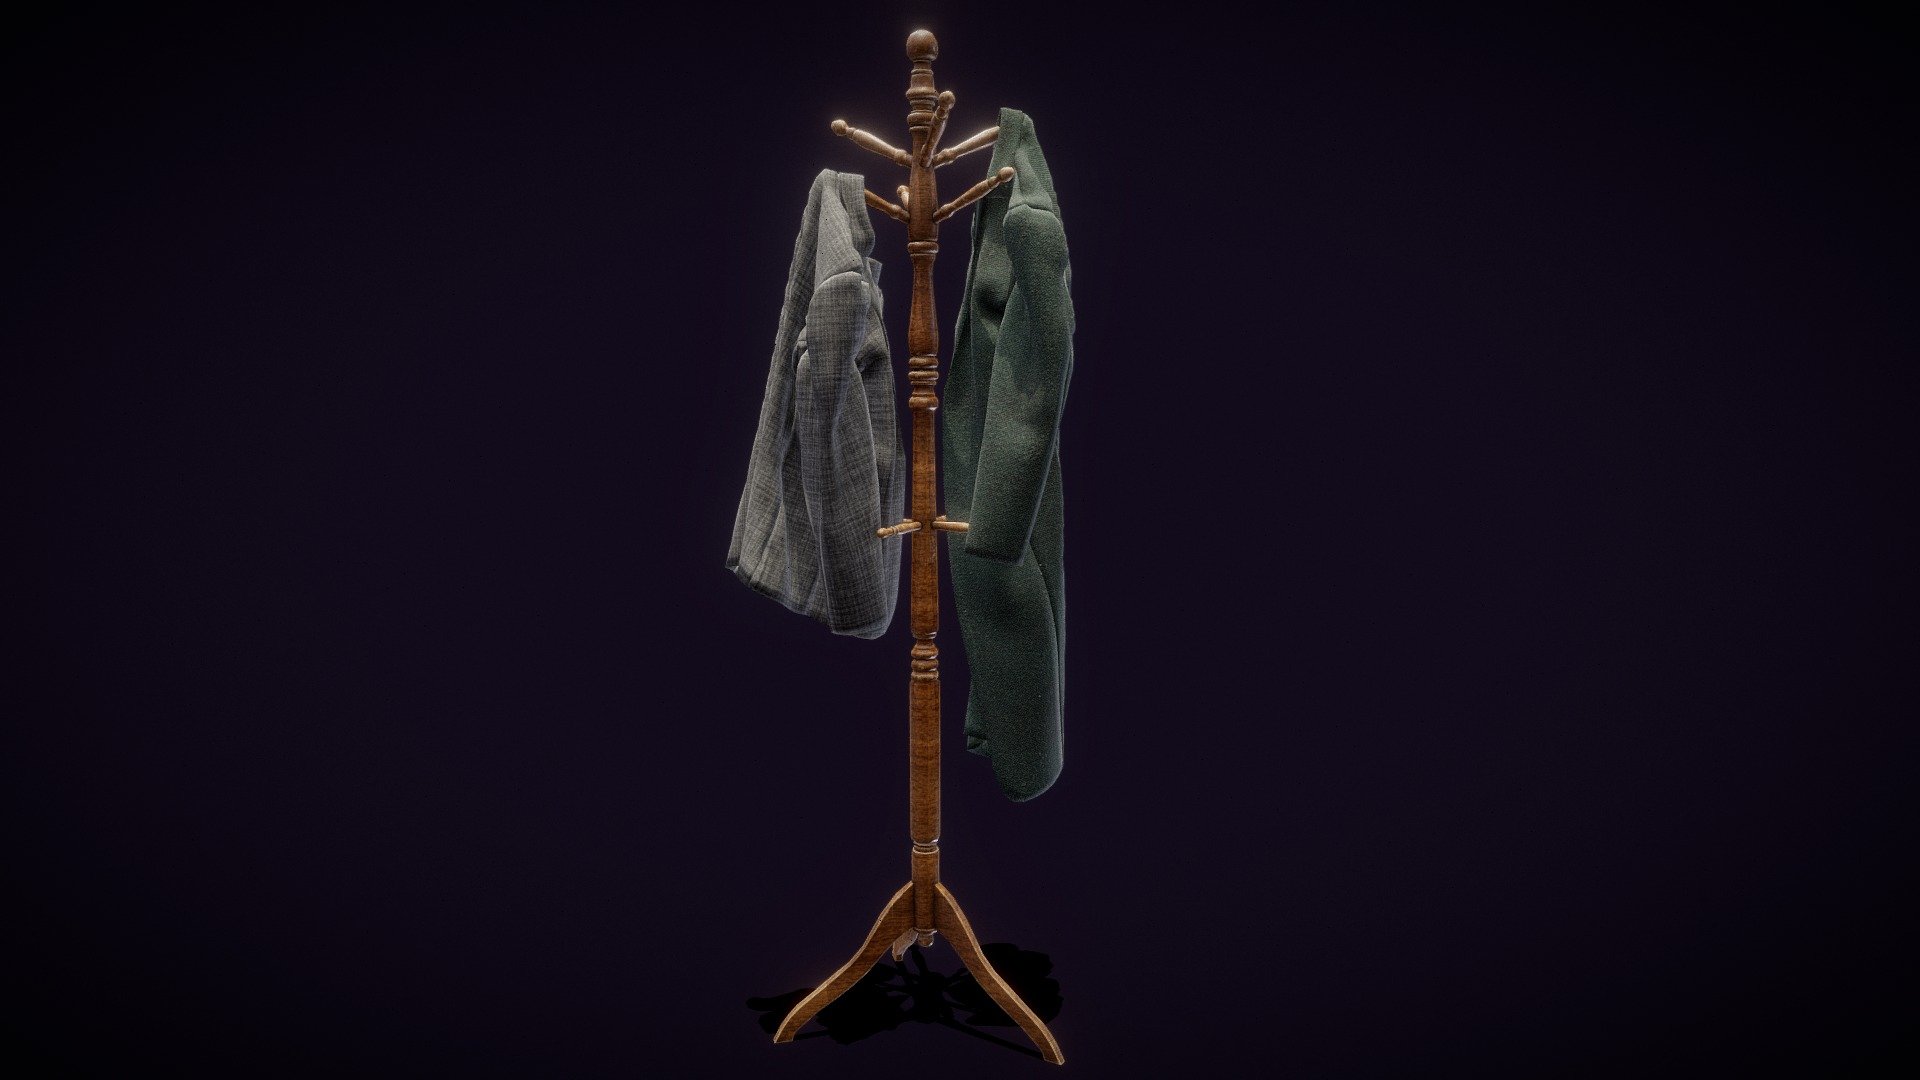 An old wooden rack with a pair of coats. It can be use in any old office or living space. I tried to go as low poly as I could with the cloth simulation without loosing too much silhouette.

All Quads (20, 517 Quads / 41,034 Tris)
3 sets of PBR textures: Wooden Rack / Jacket / Coat.
Direct X Normals. 
2048 x 2048 px Textures 3d model